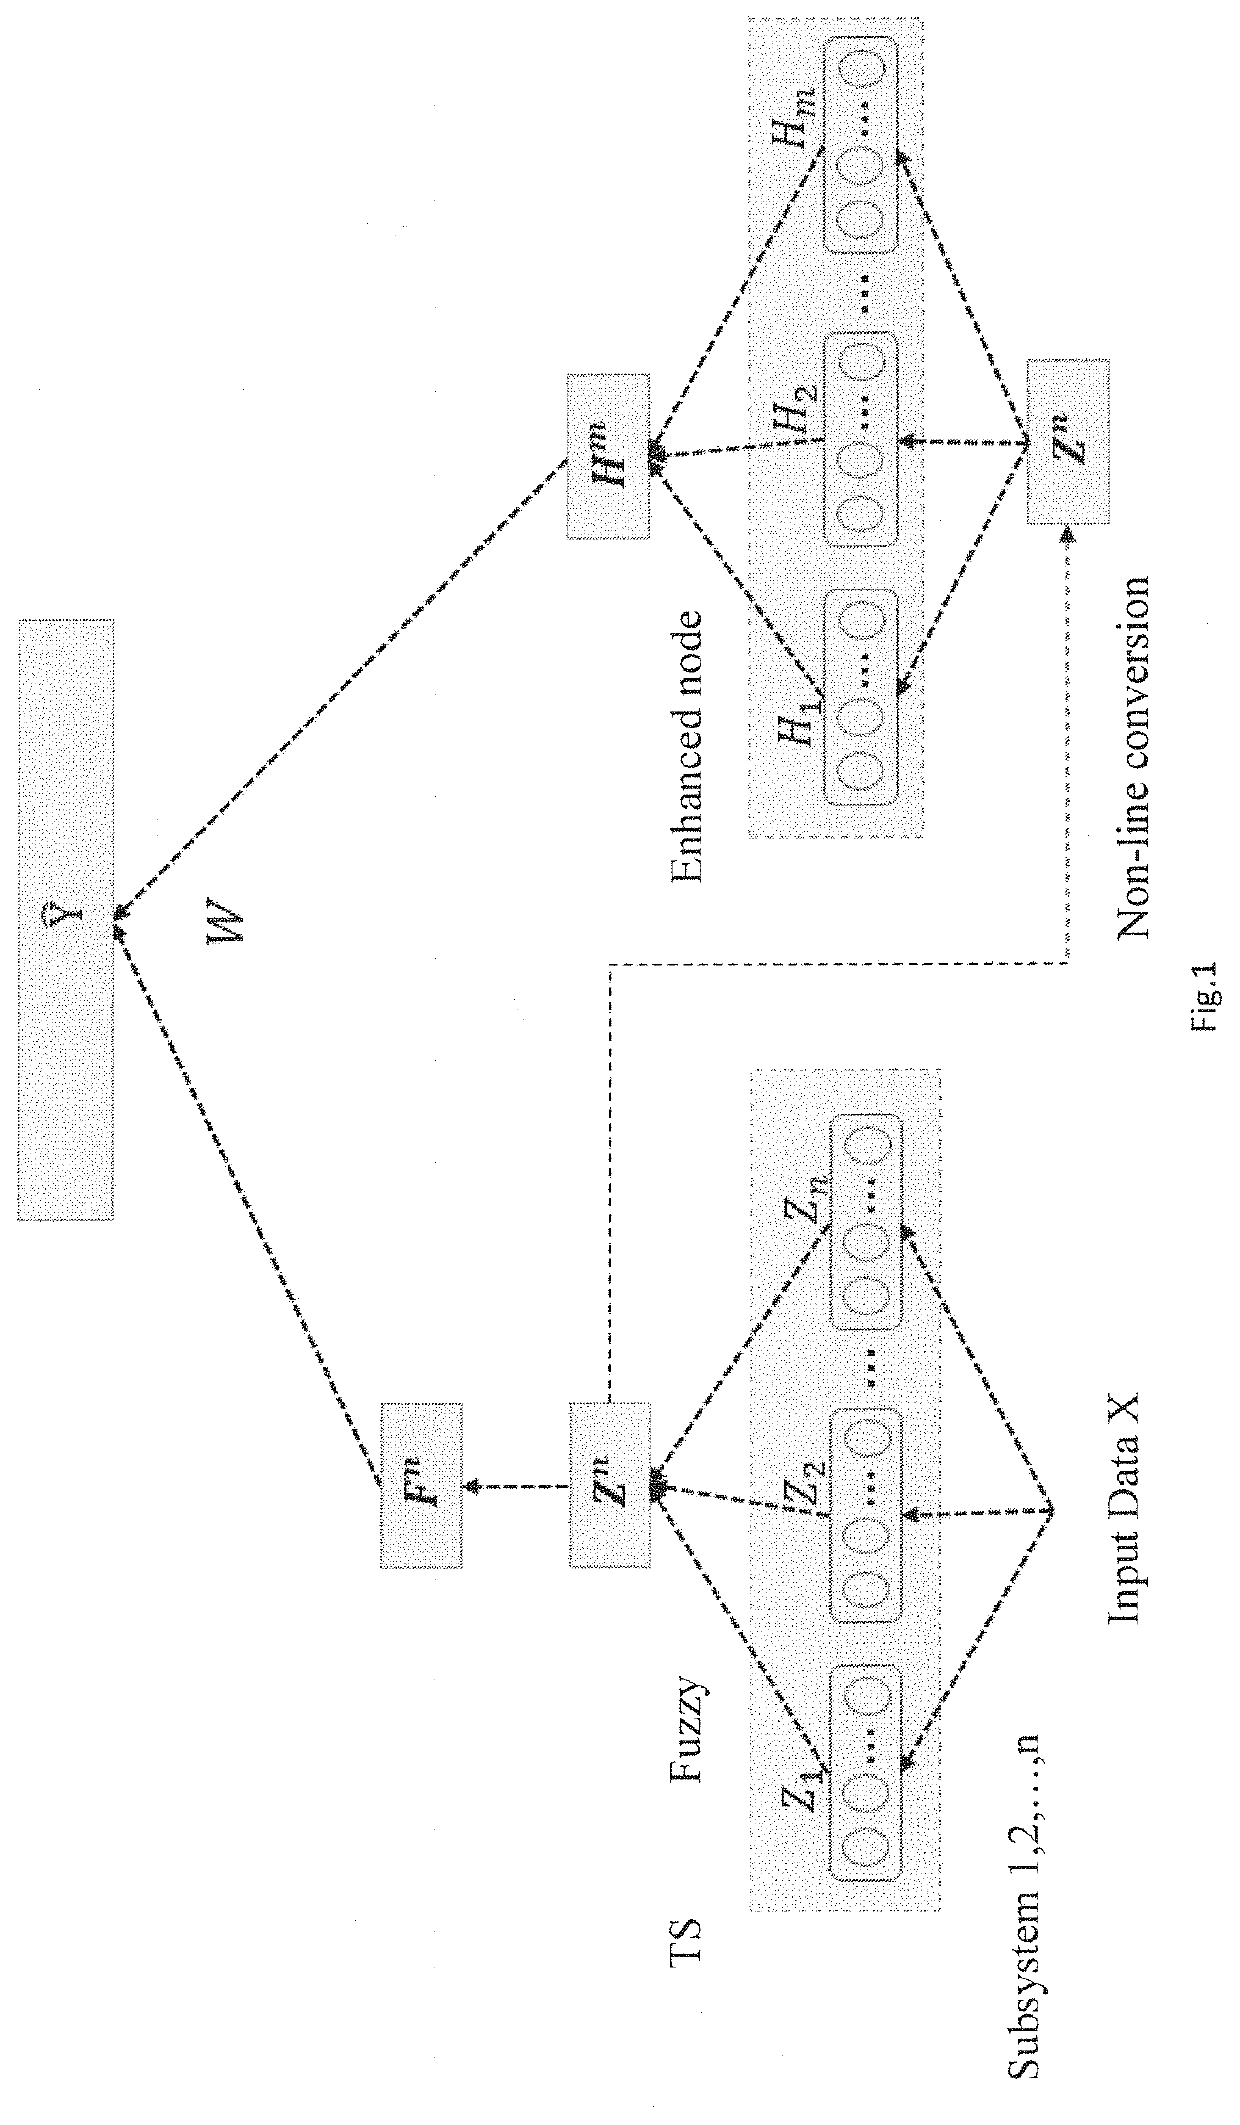 Fault monitoring method for sewage treatment process based on fuzzy width adaptive learning model